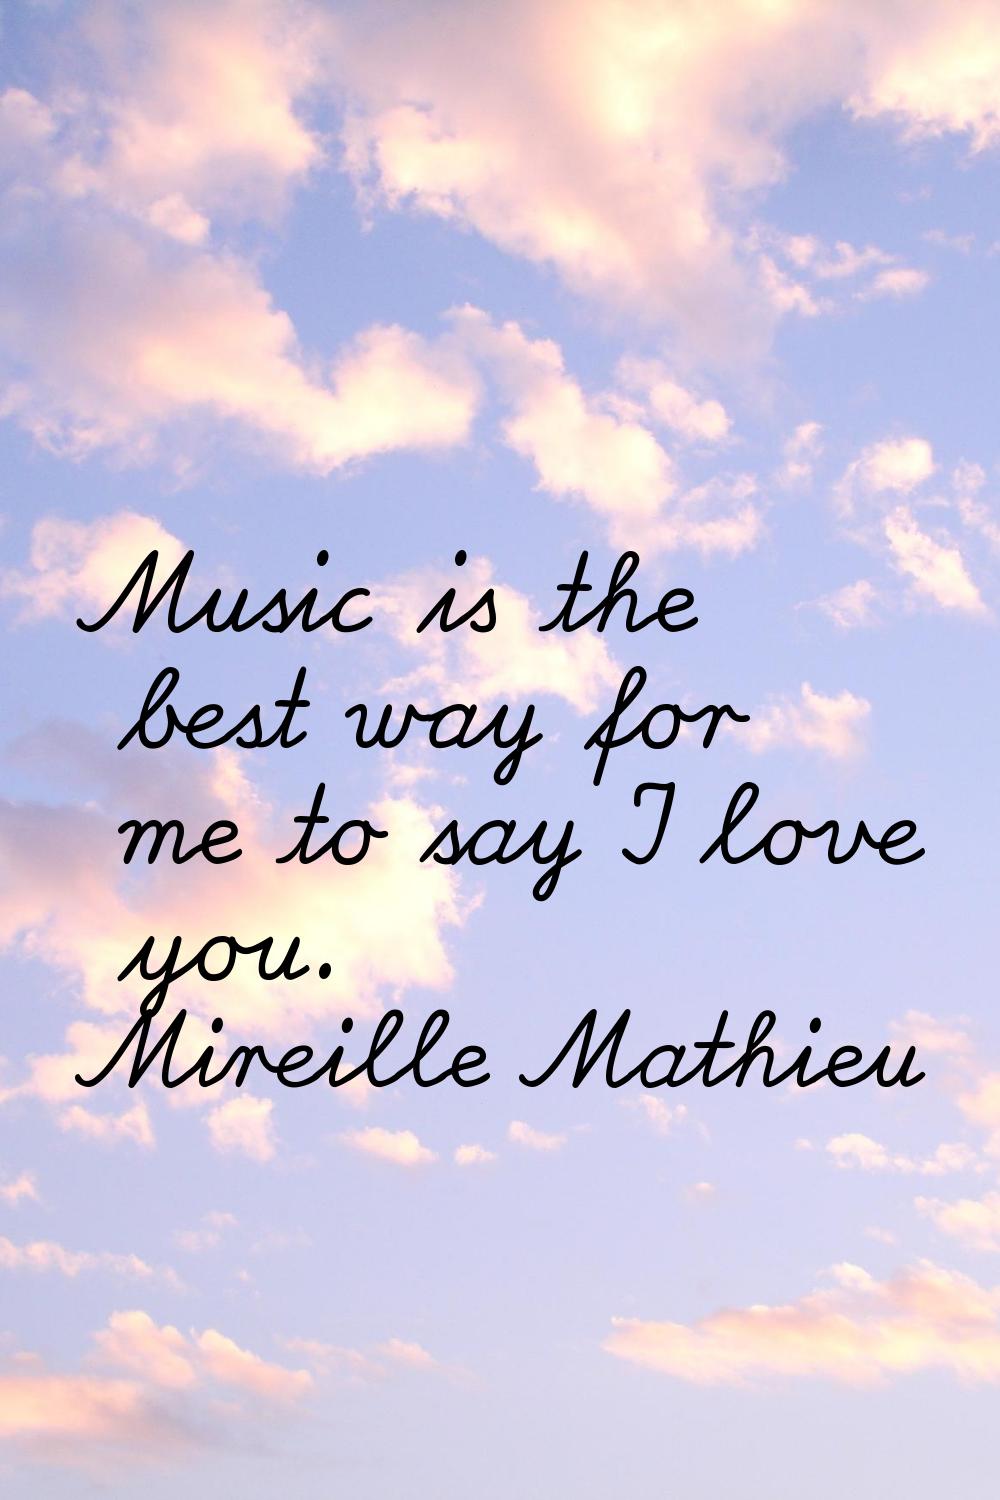 Music is the best way for me to say I love you.